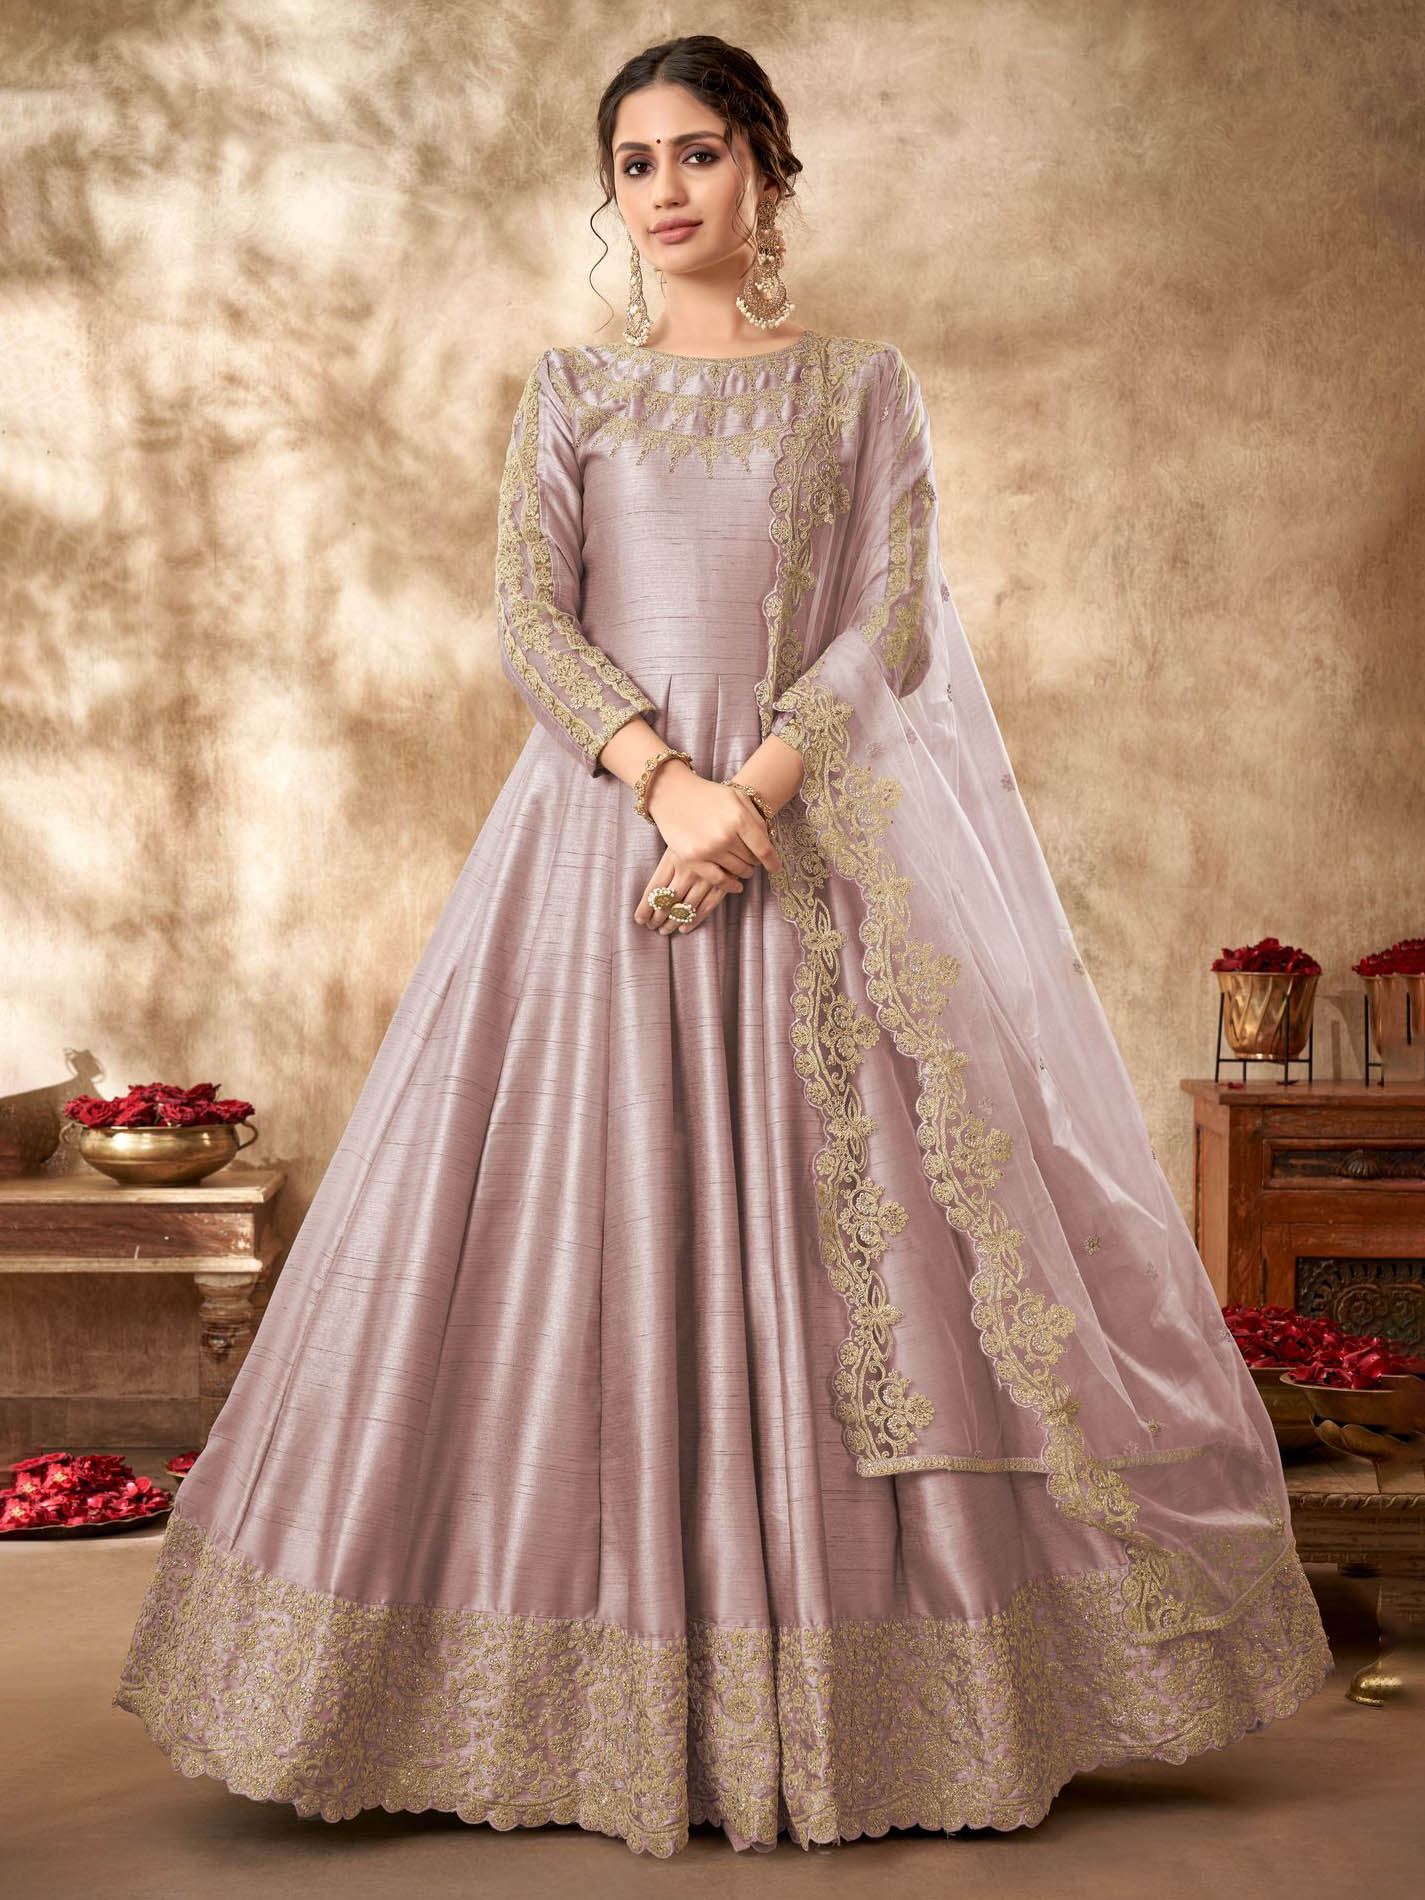 Buy Women's Fully Stitched Soft Silk Indo-Western Long Gowns at Amazon.in